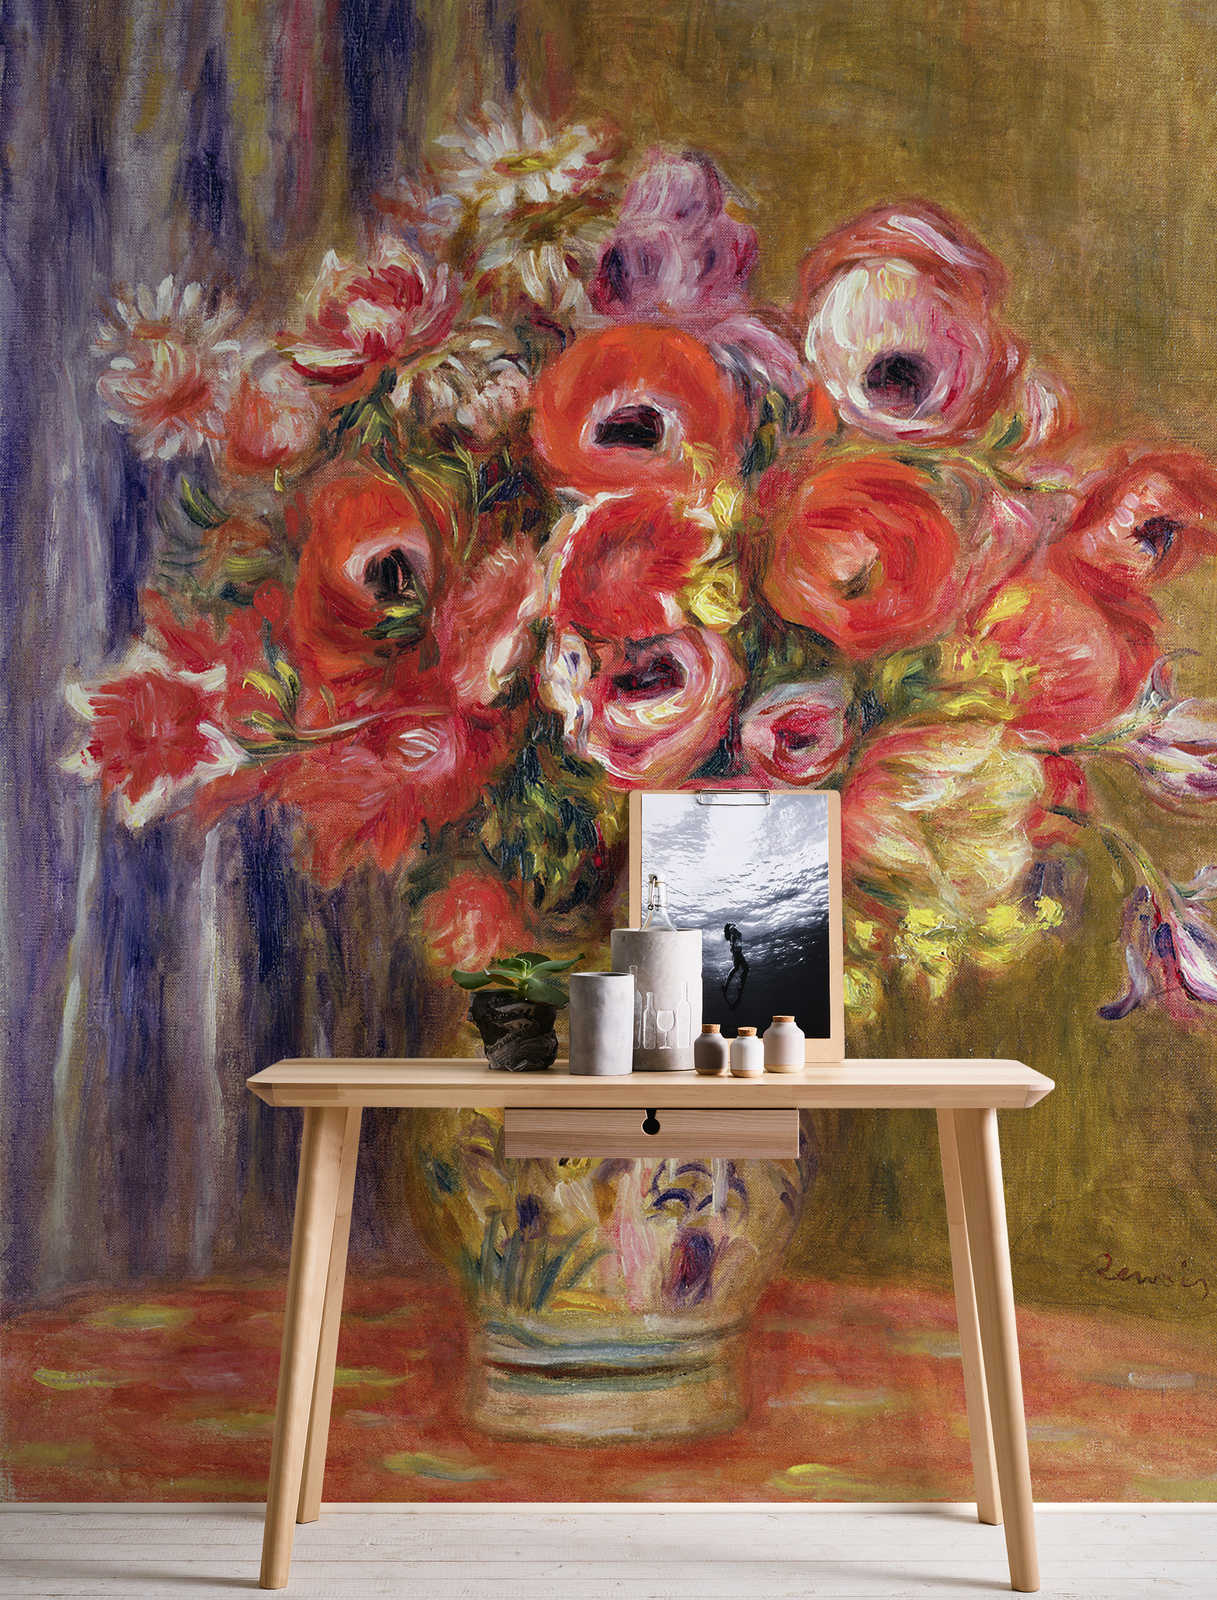             Photo wallpaper "Vase with tulips and anemones" by Pierre Auguste Renoir
        